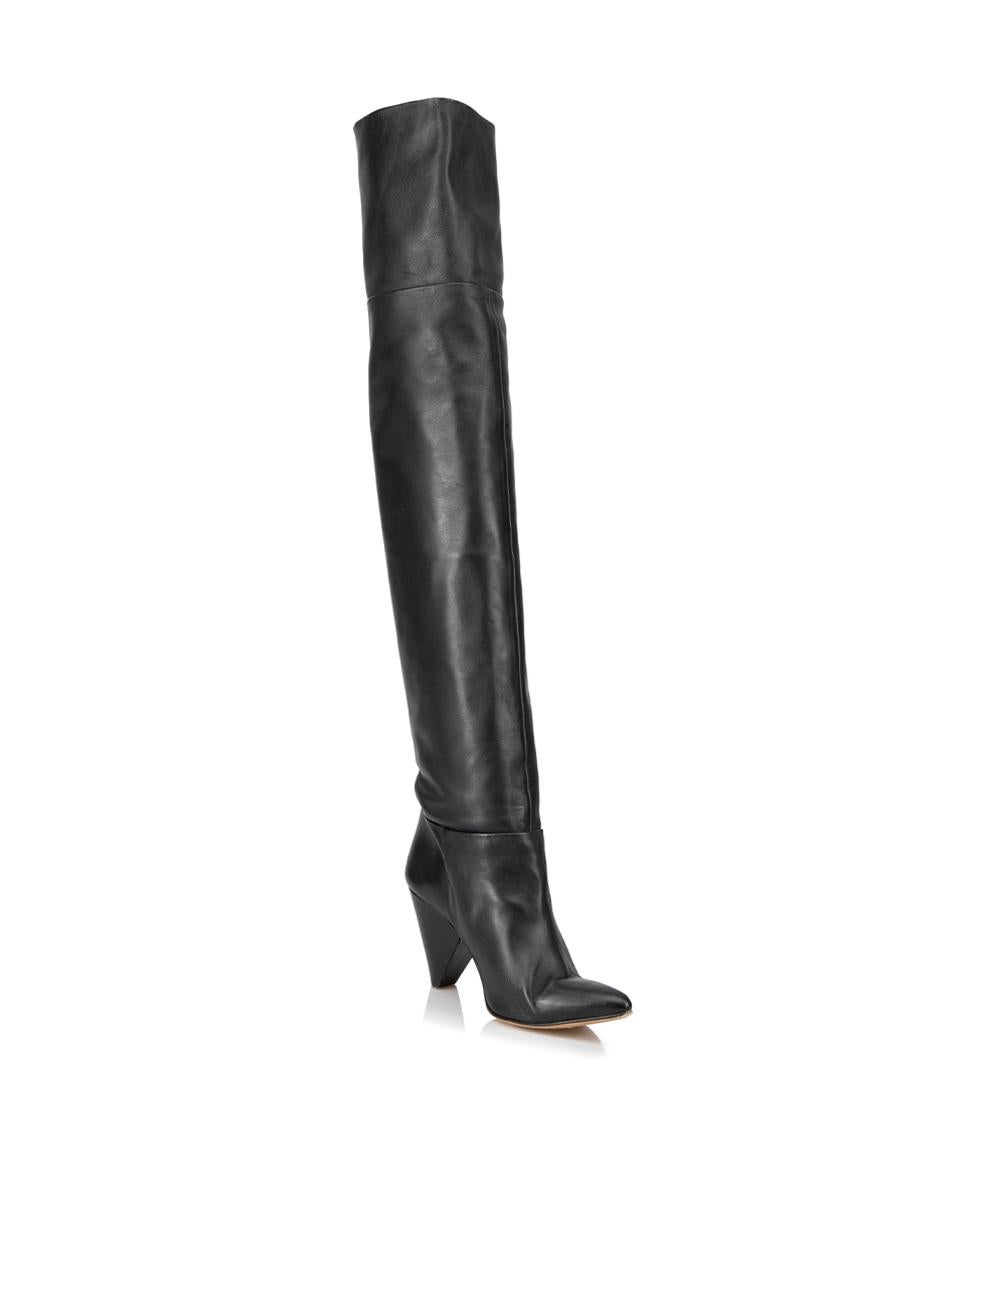 CONDITION is Very good. Minimal wear to boots is evident. Minimal wear to the leather exterior and heel stem where scuffs can be seen on this used Essential Antwerp designer resale item. 
 
 Details
  Black
 Leather
 Thigh high boots
 Pointed toe
